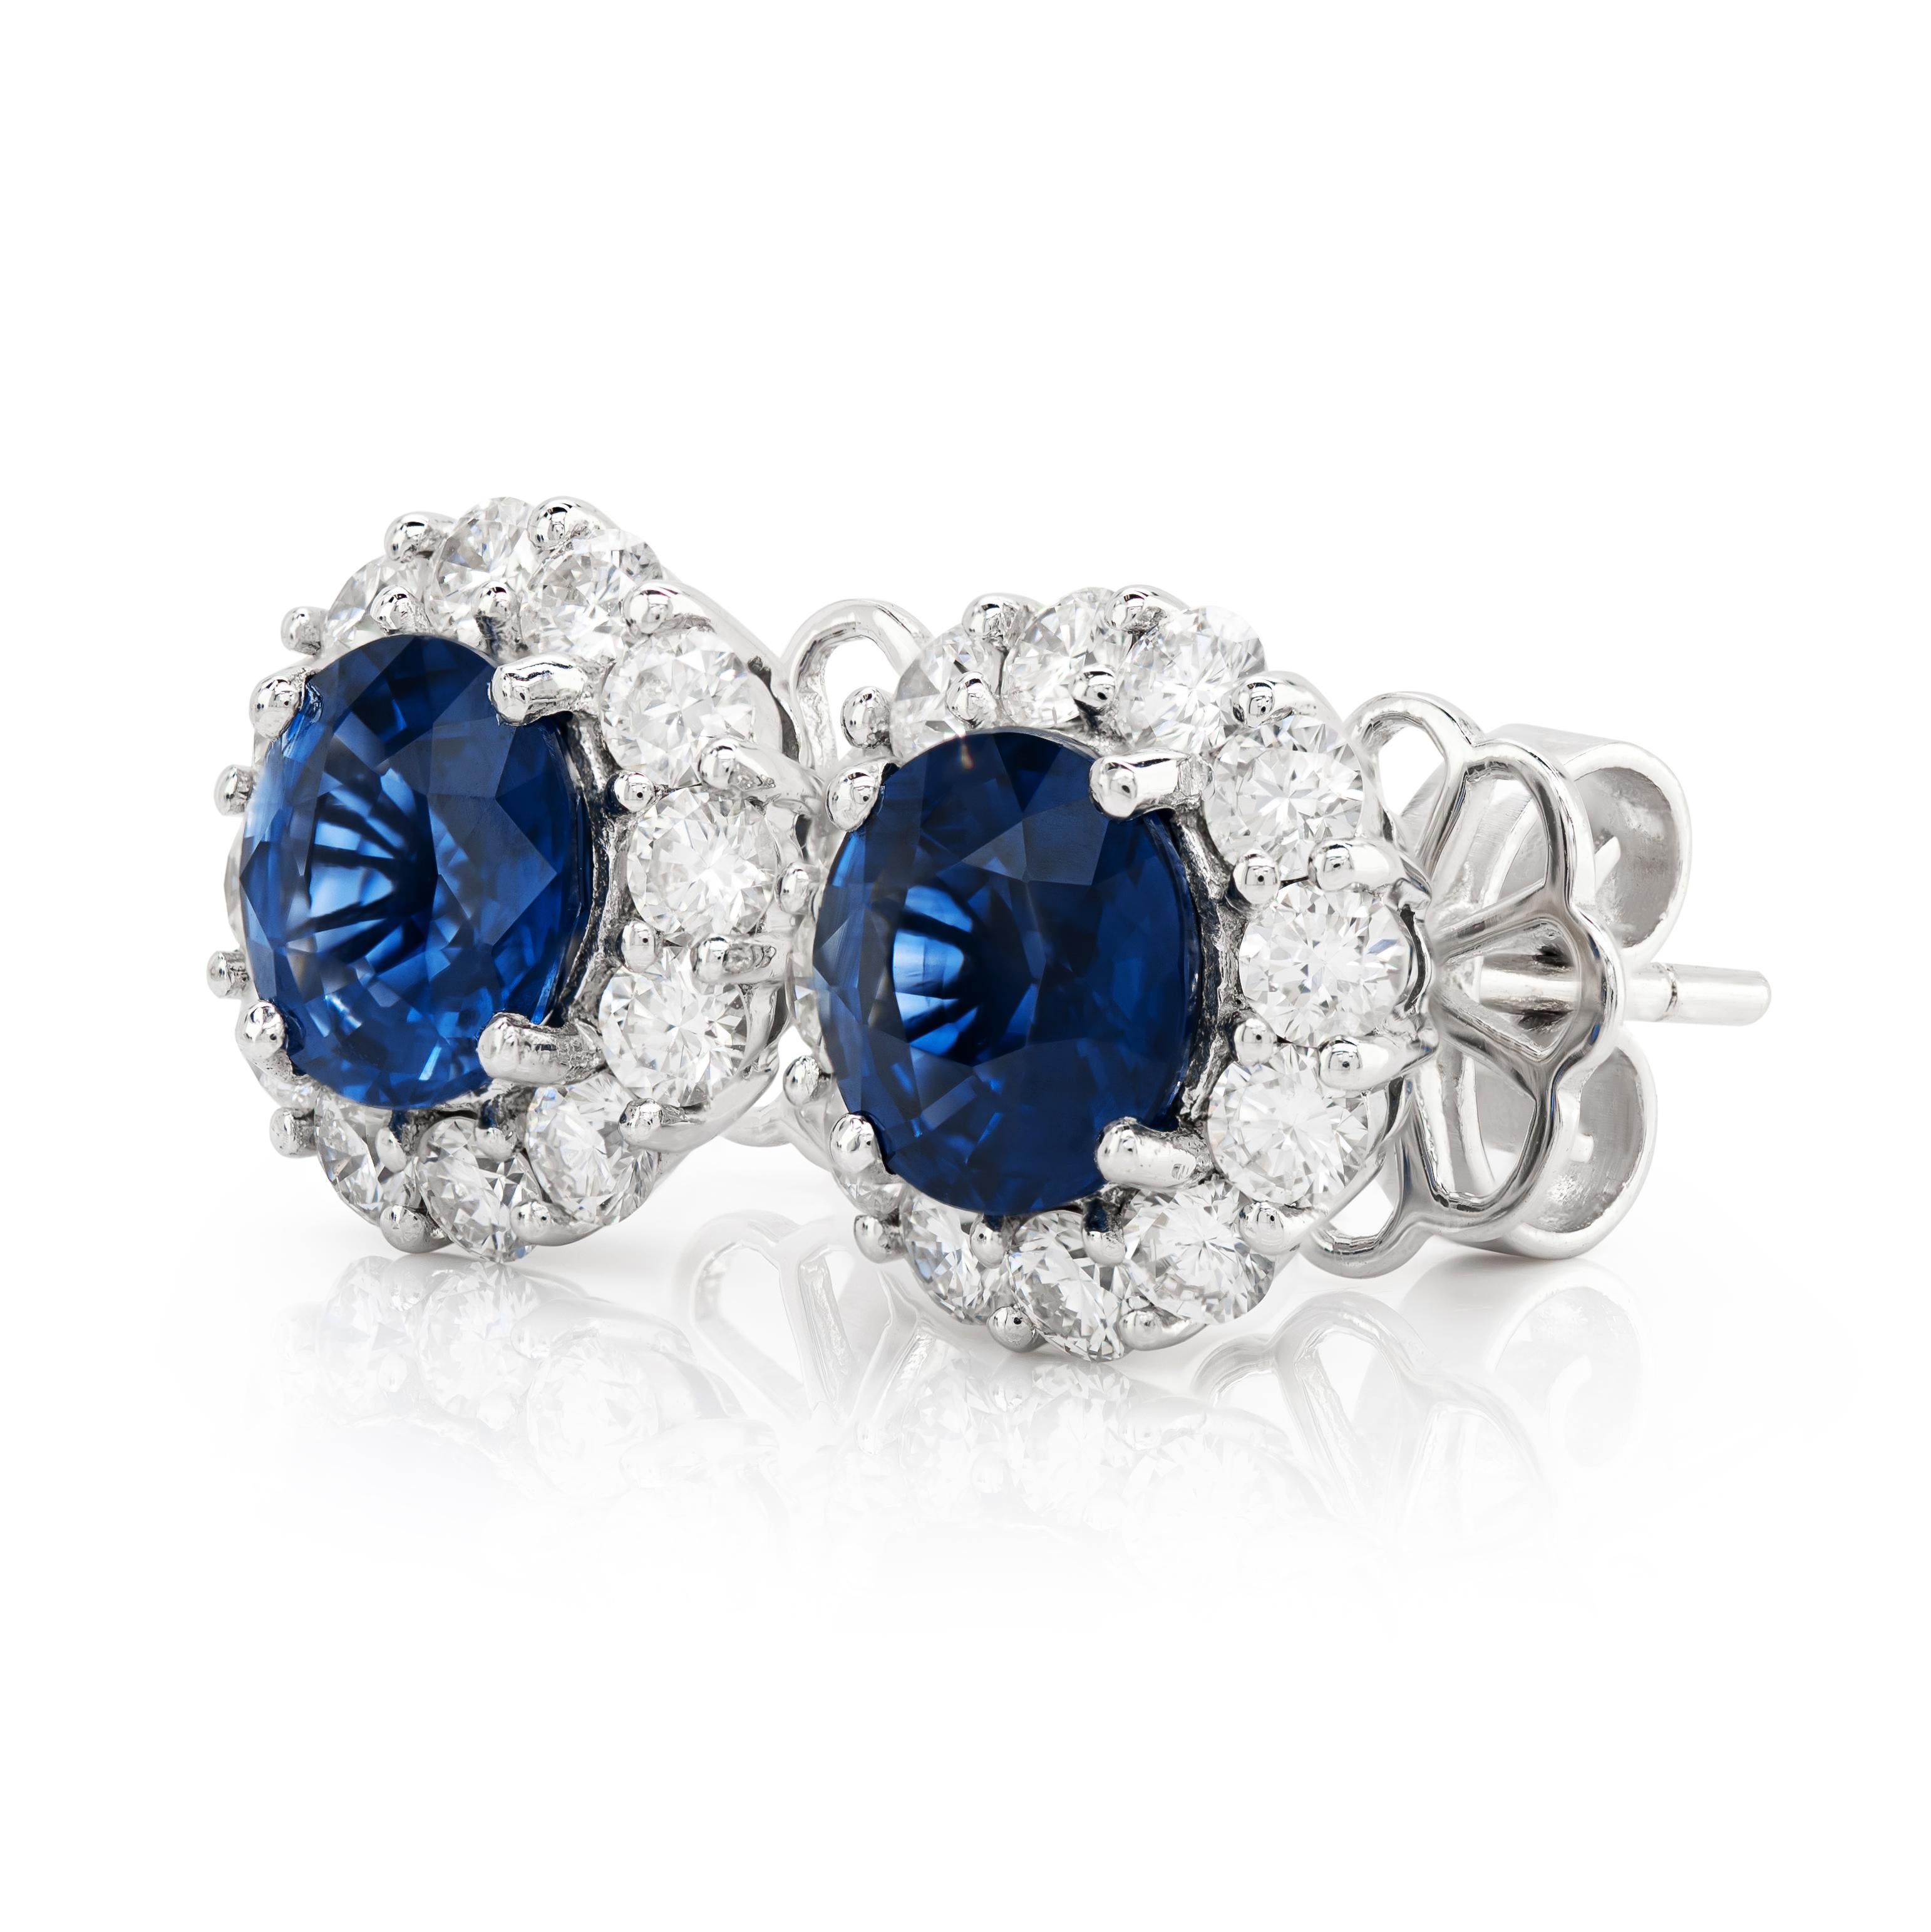 These 'Eyes of the Ocean' rare Blue Sapphire earrings are elegantly placed in a beautifully textured white gold setting. 2.60 carats Rare Blue Sapphire Earrings are brilliantly set with 18K White Gold, creating tremendous contrast between the luster